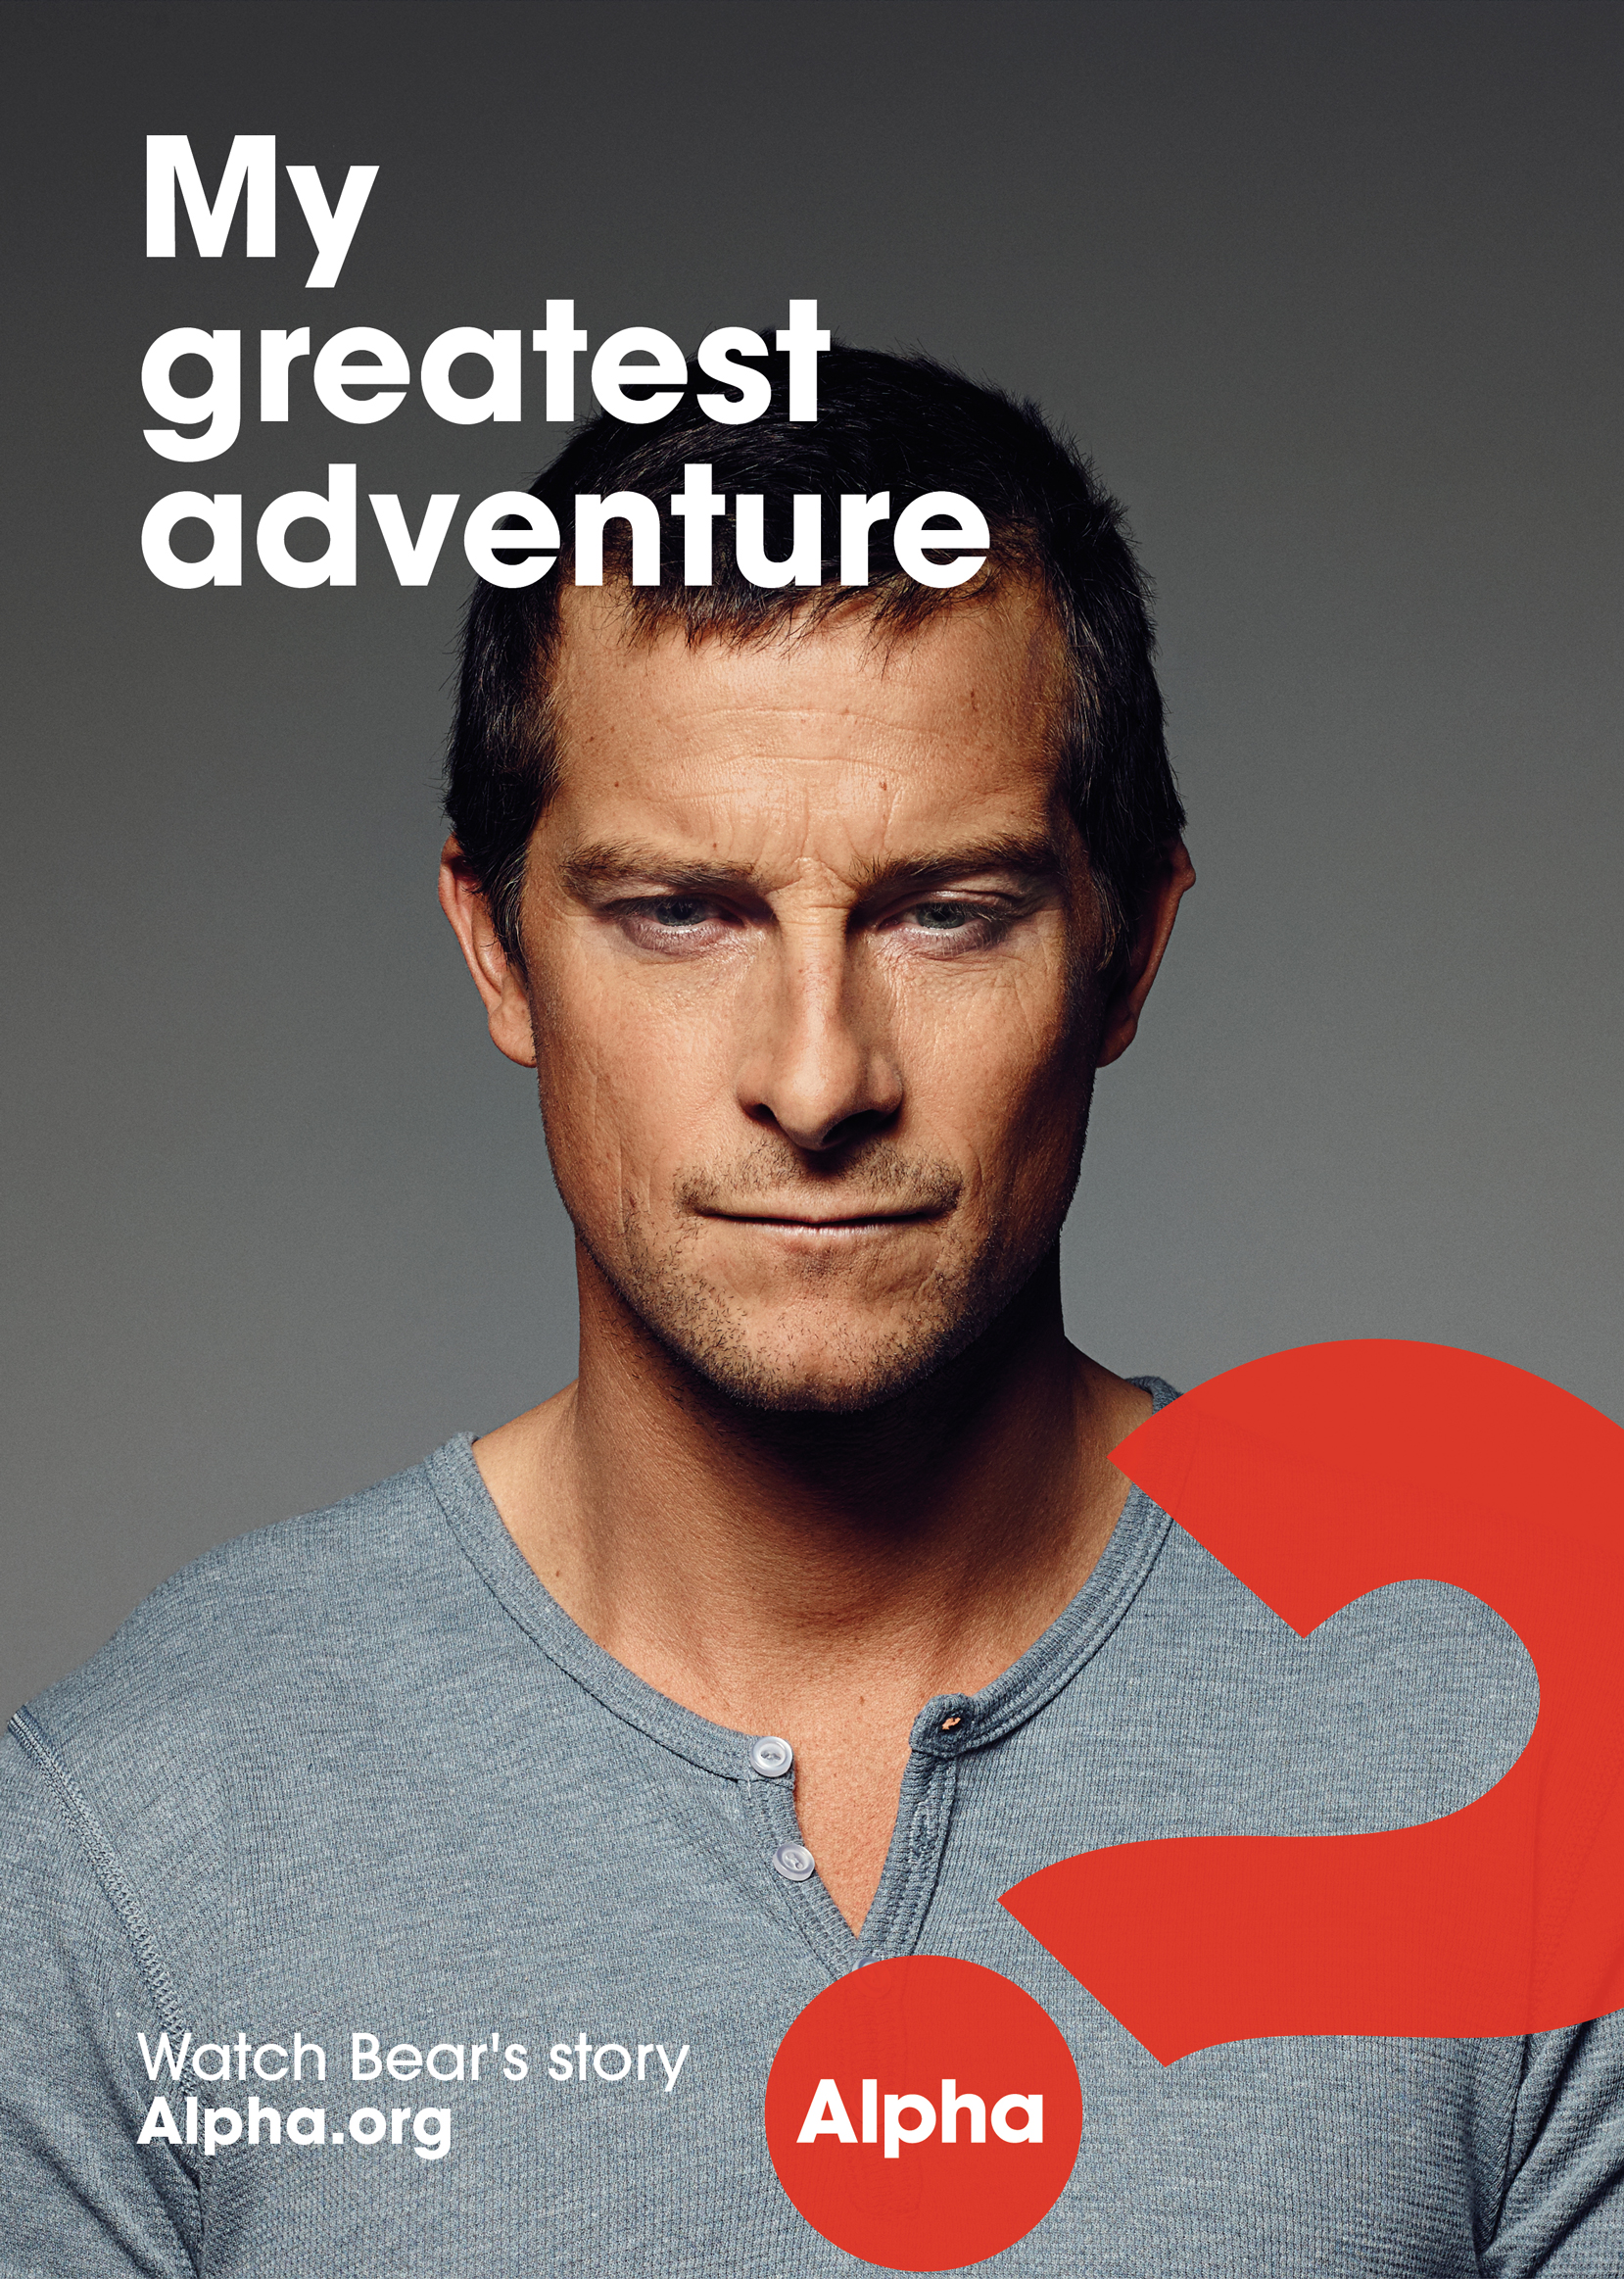 Bear Grylls fronts the Alpha Global Campaign